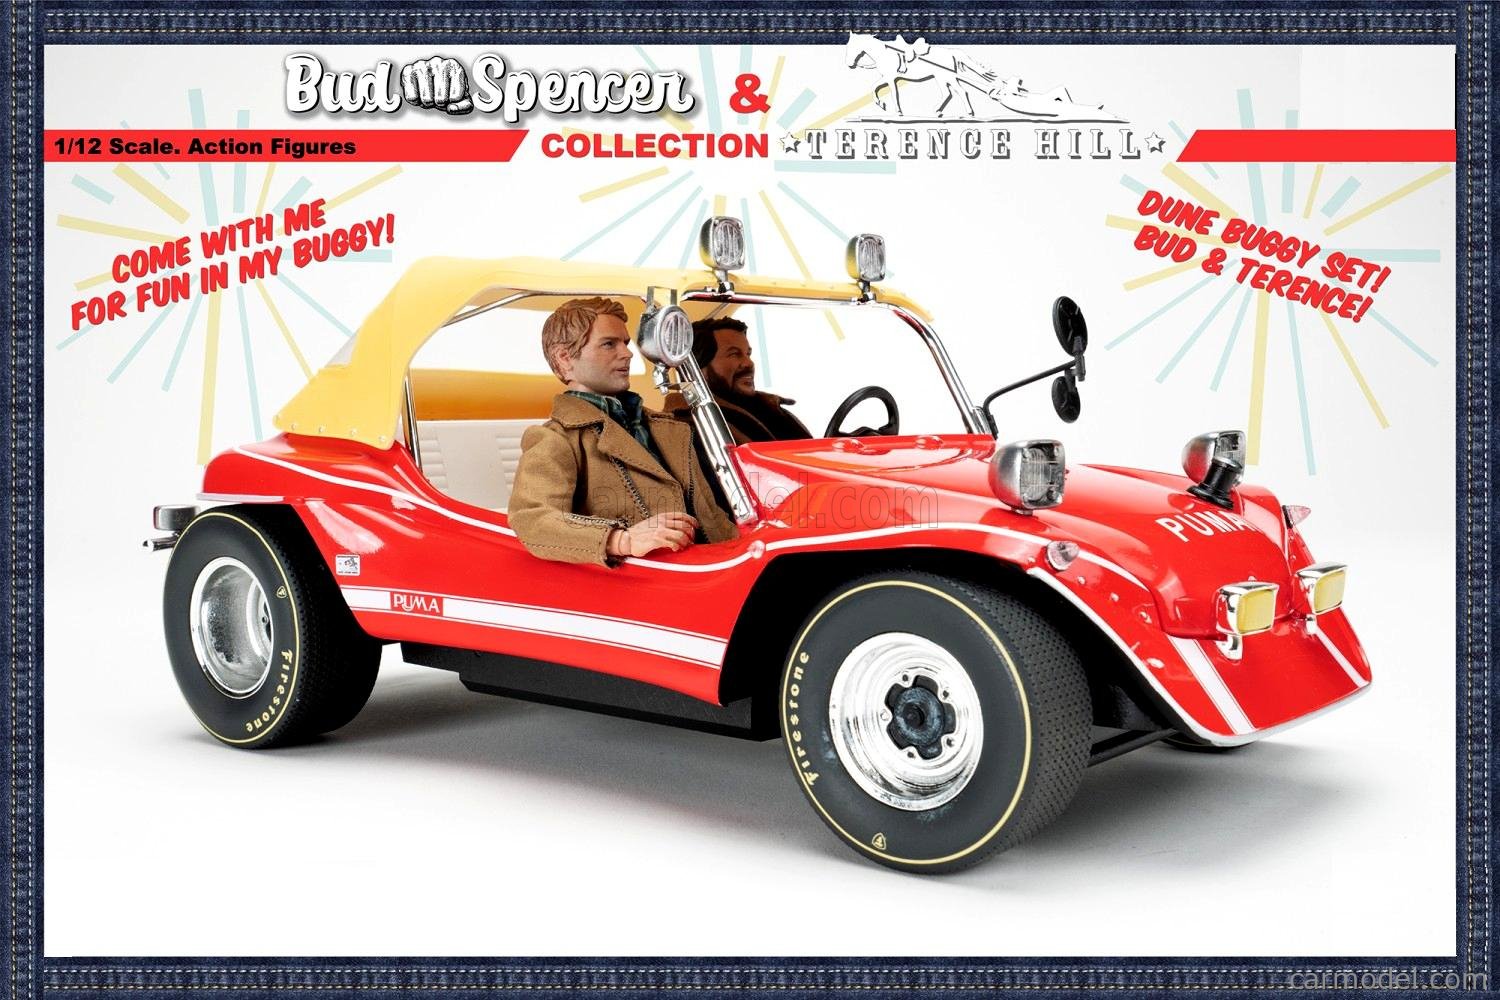 CLC-MODELS 90025+90020+90018 Scale 1/12  PUMA DUNE BUGGY 1972 - WITH BUD SPENCER AND TERENCE HILL ACTION FIGURES - TV SERIES - ALTRIMENTI CI ARRABBIAMO RED